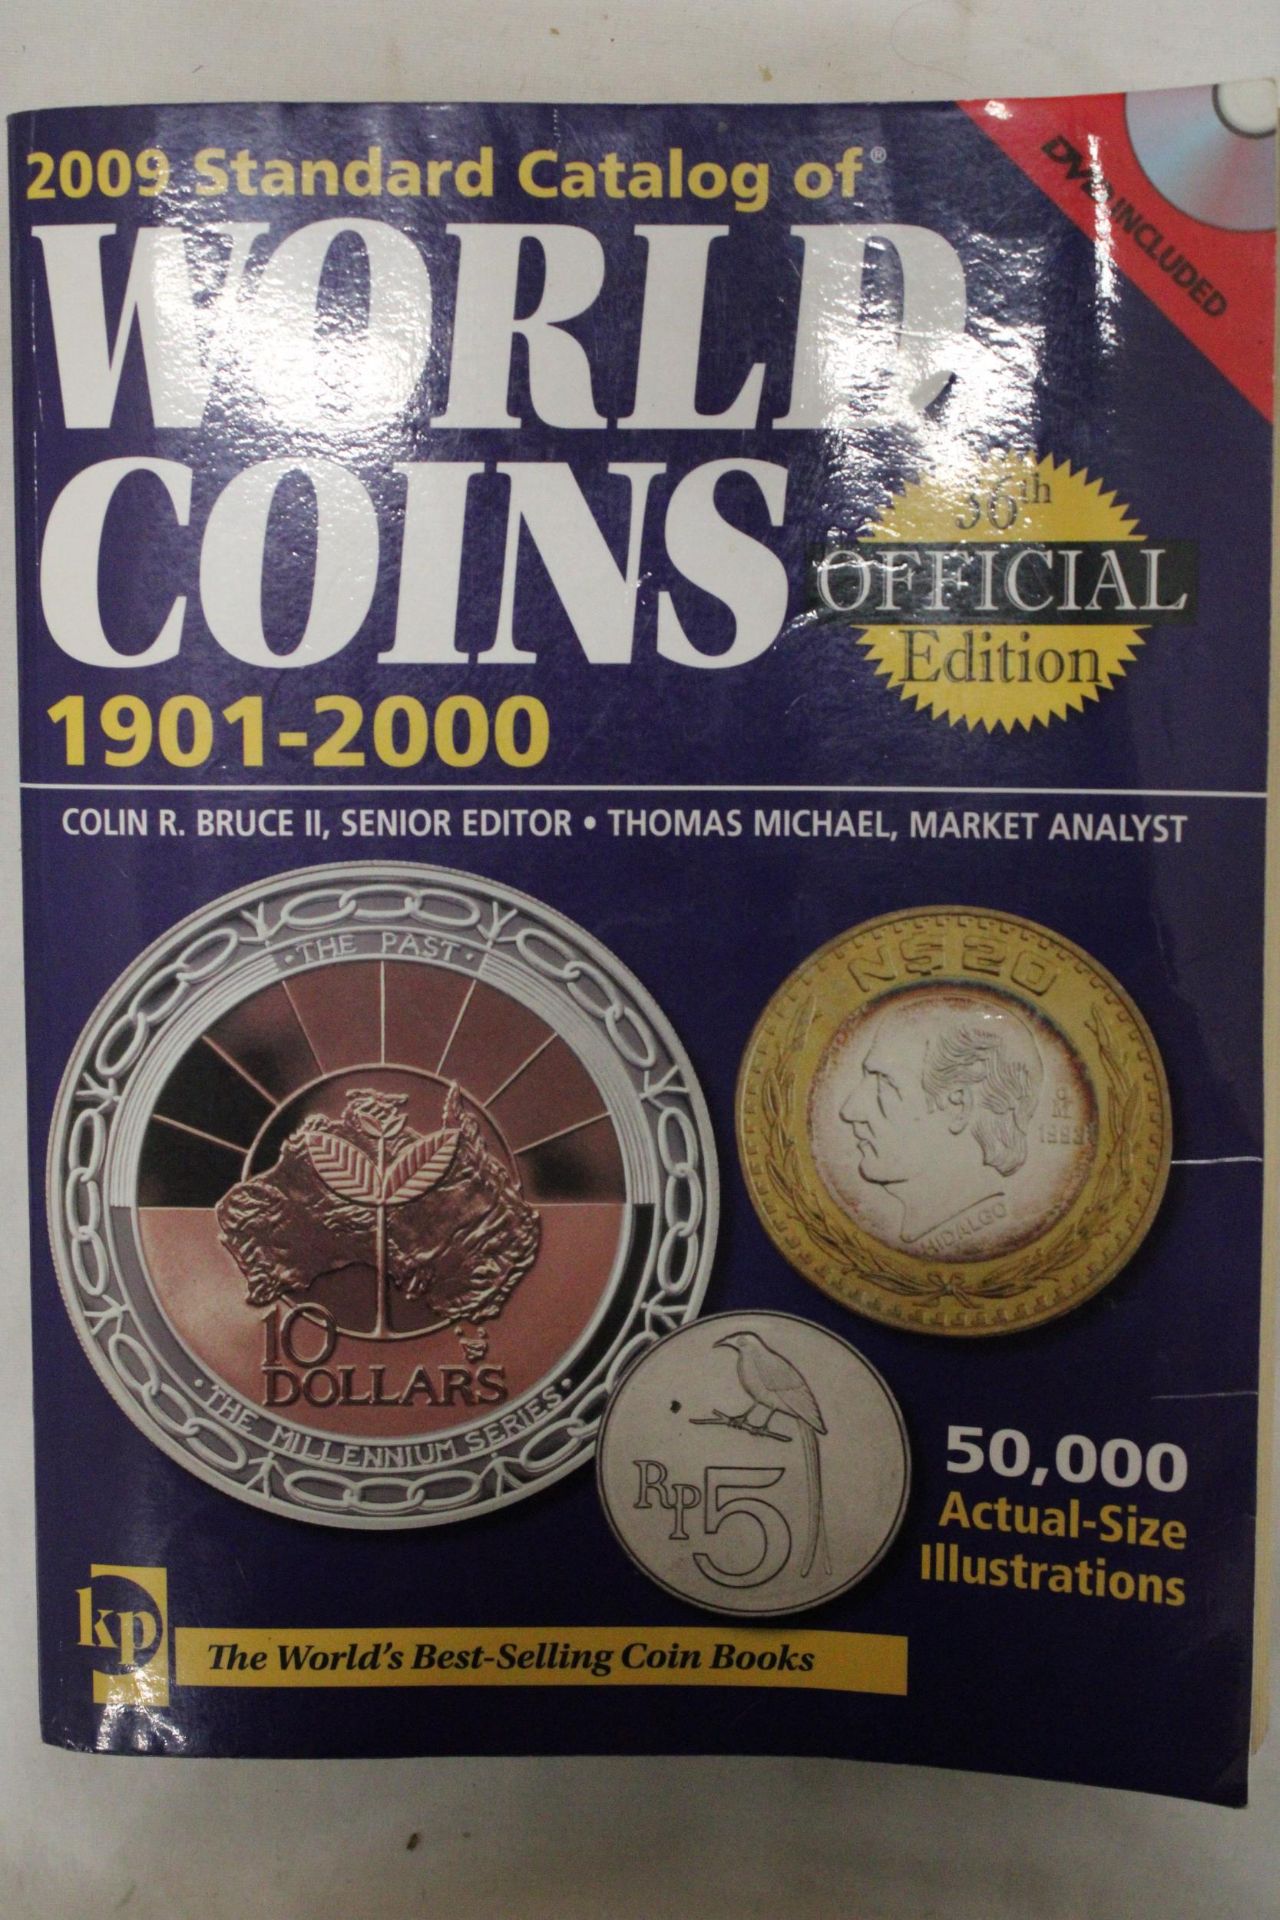 A WORLD COINS BOOK 1901-2000, OVER 2000 PAGES - PRICED 60 DOLLARS - Image 2 of 6